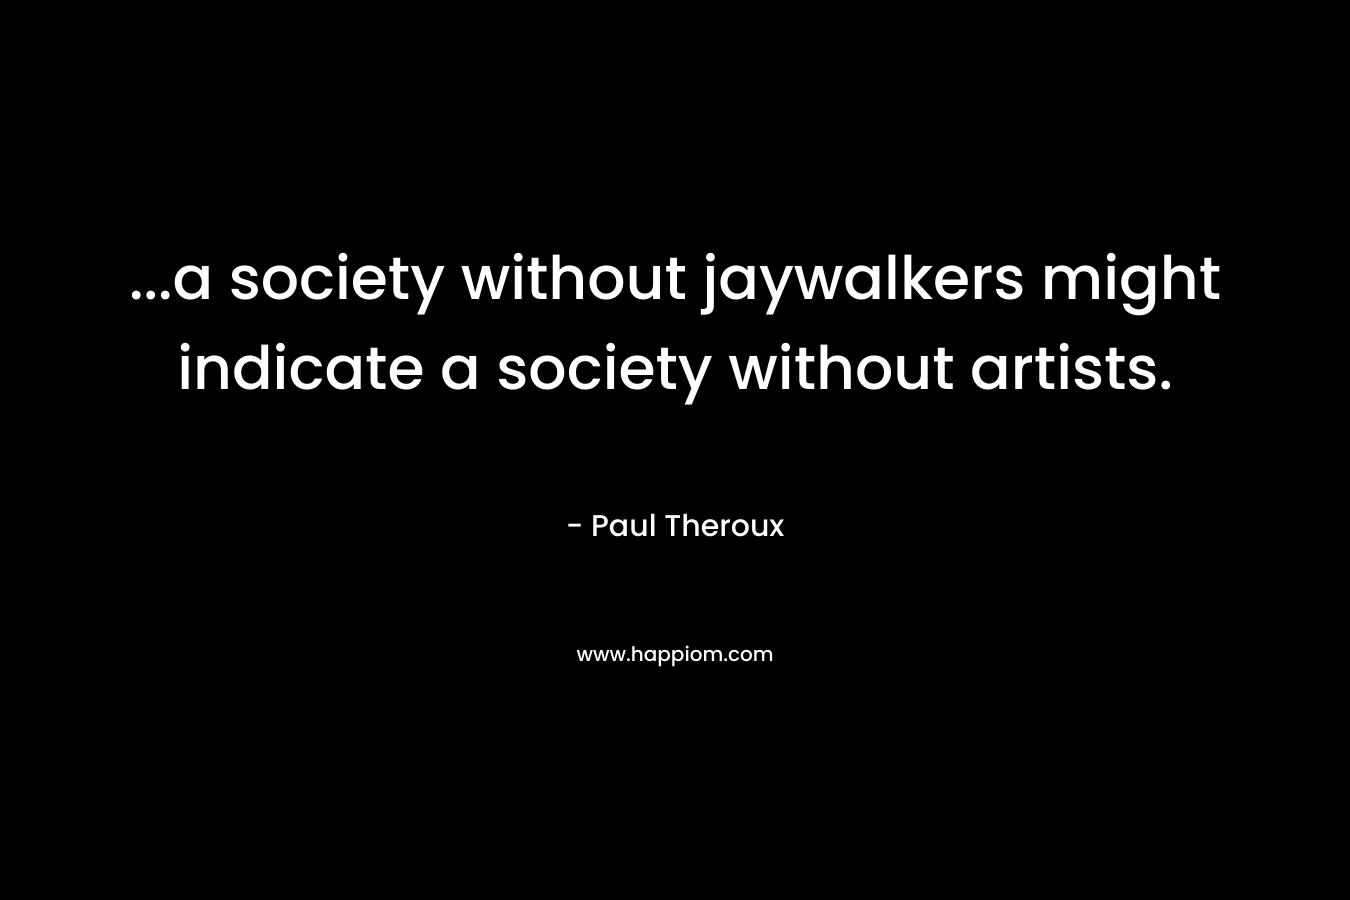 …a society without jaywalkers might indicate a society without artists. – Paul Theroux